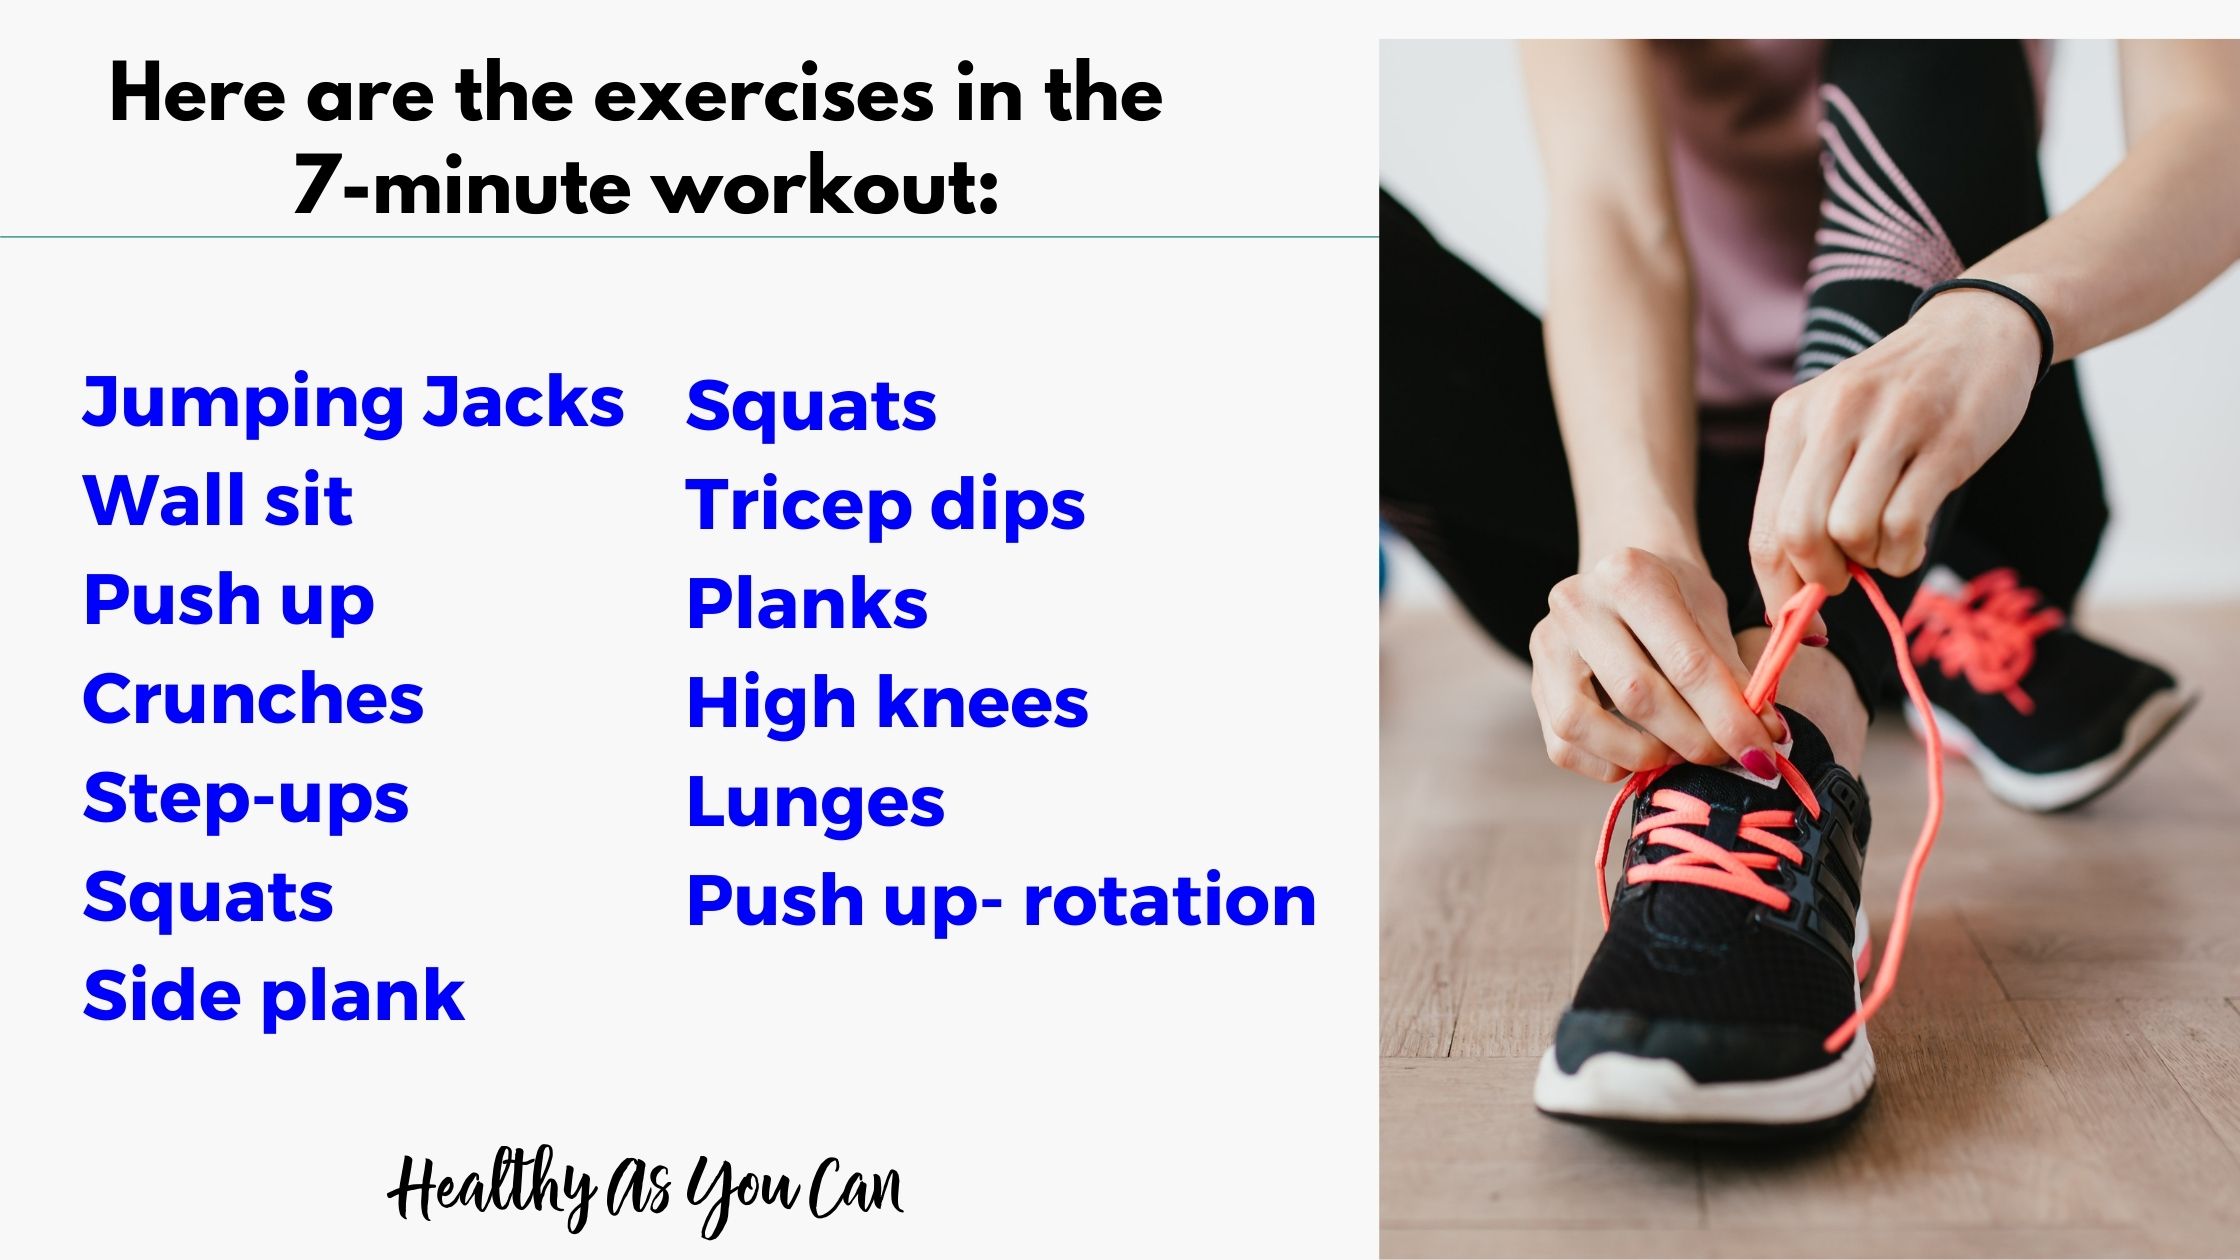 7-minute workout exercises